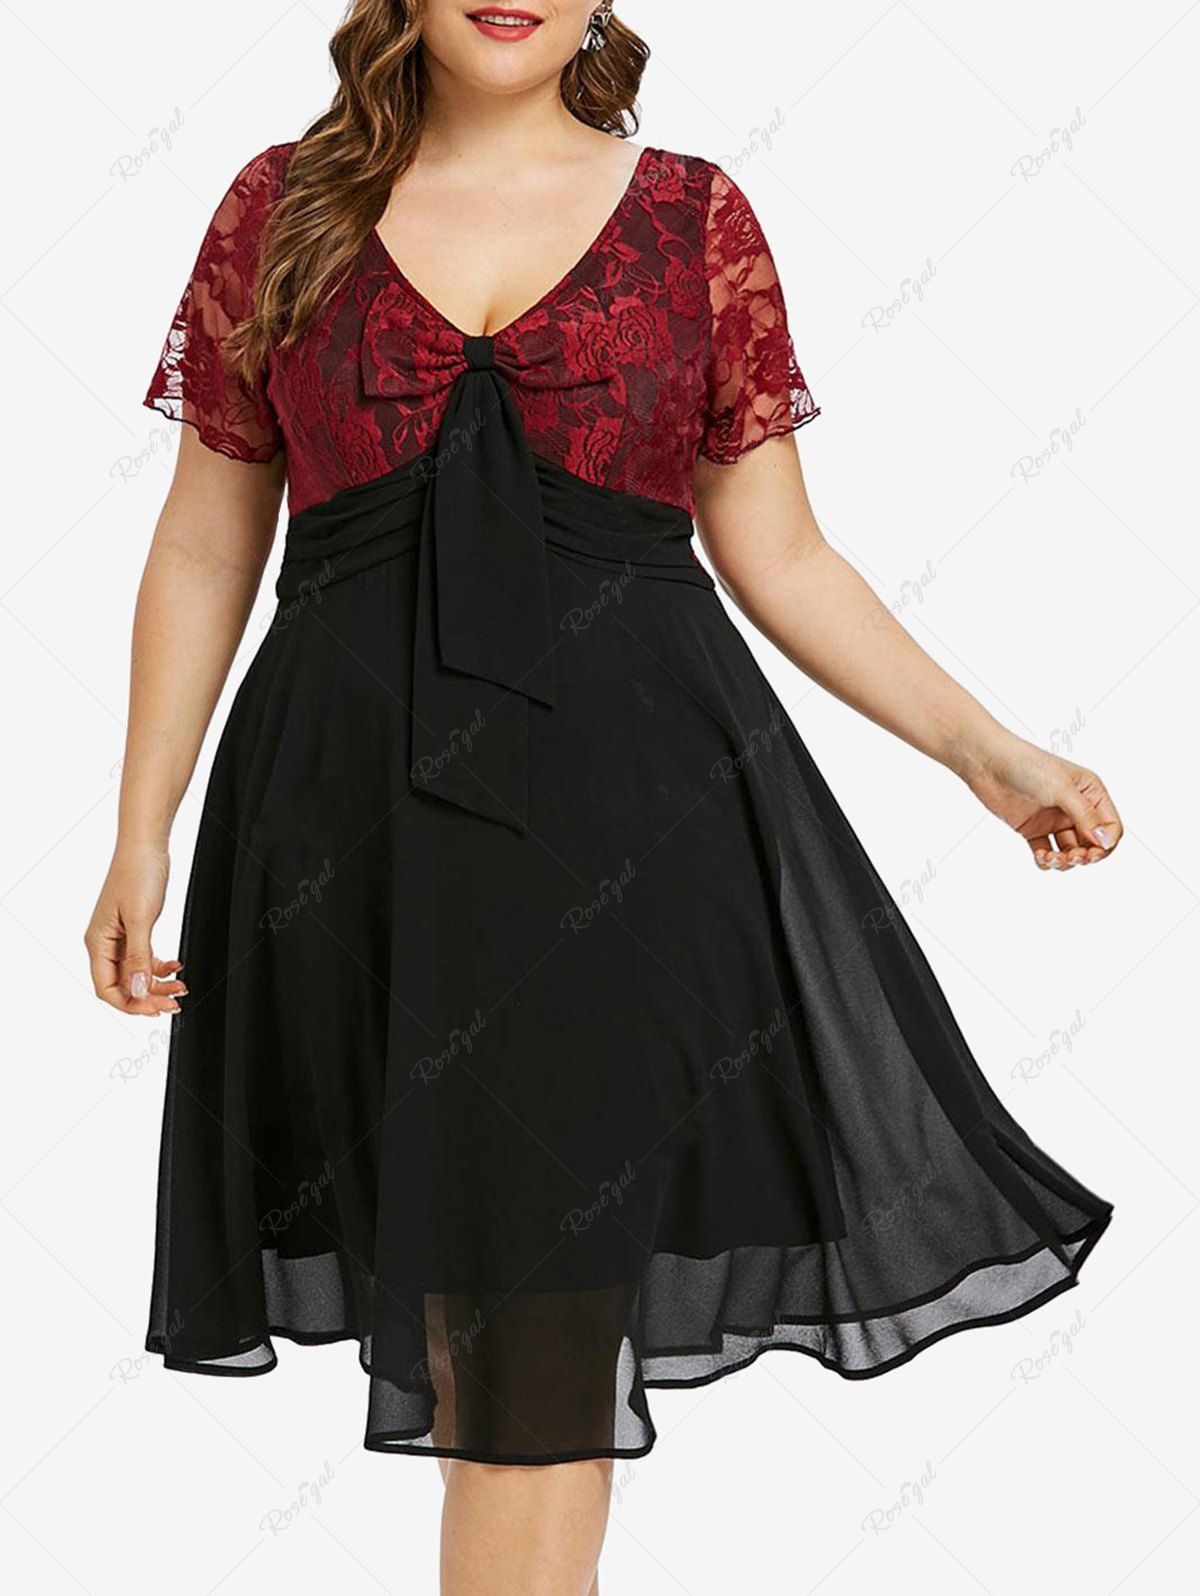 Sale Plus Size Floral Lace Bowknot Embellished Layered Dress  